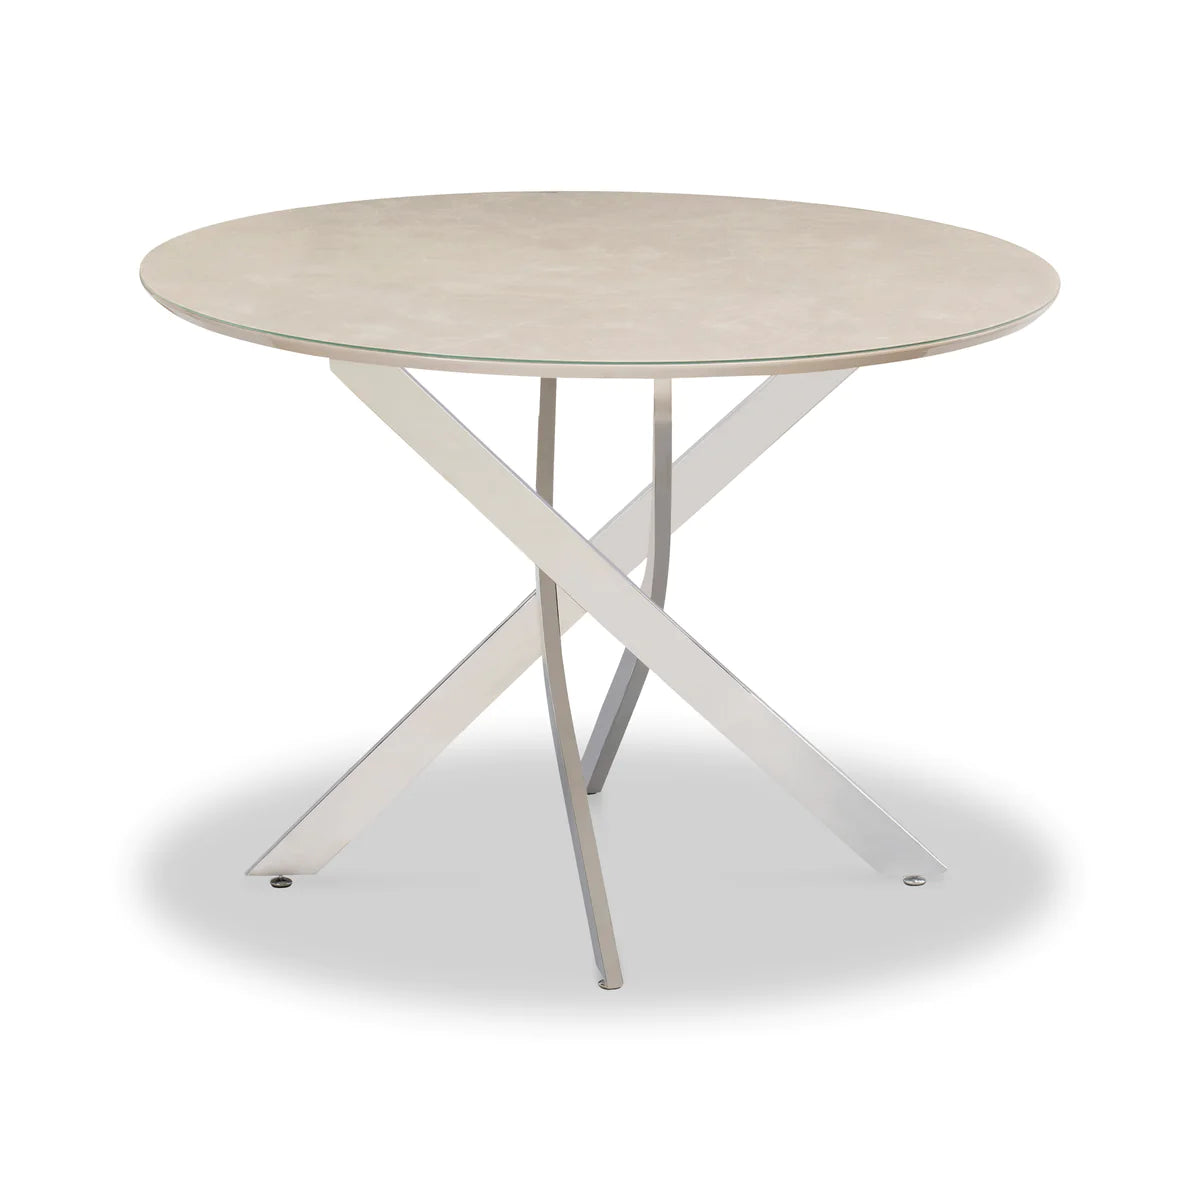 Carlow Round Dining Table - Stone